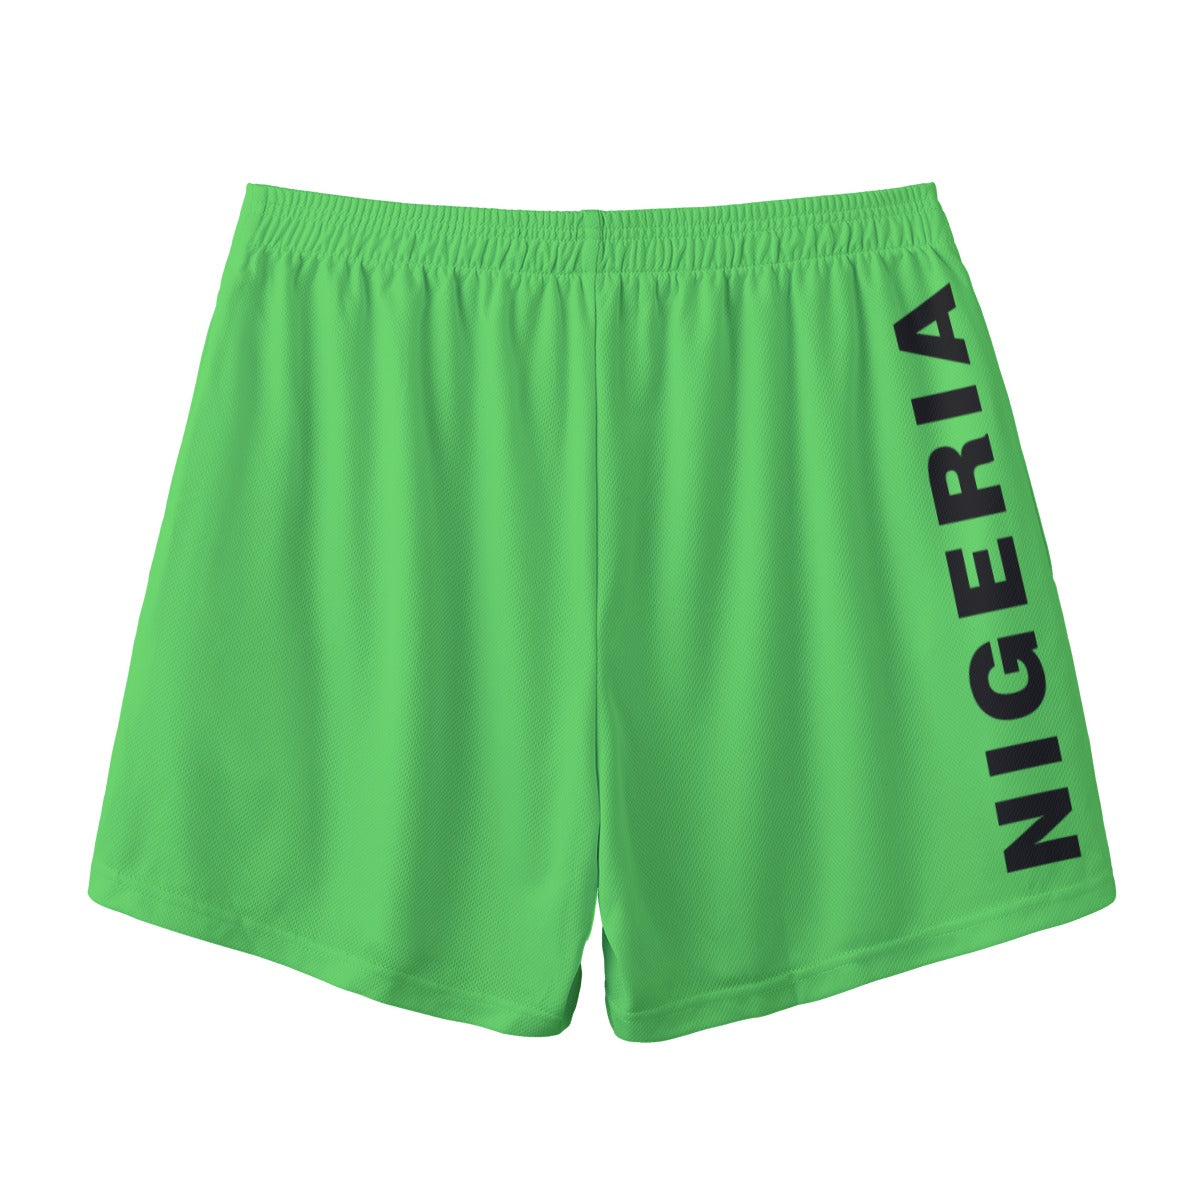 Africa Top Team Nigeria Green Men's Shorts with Pocket